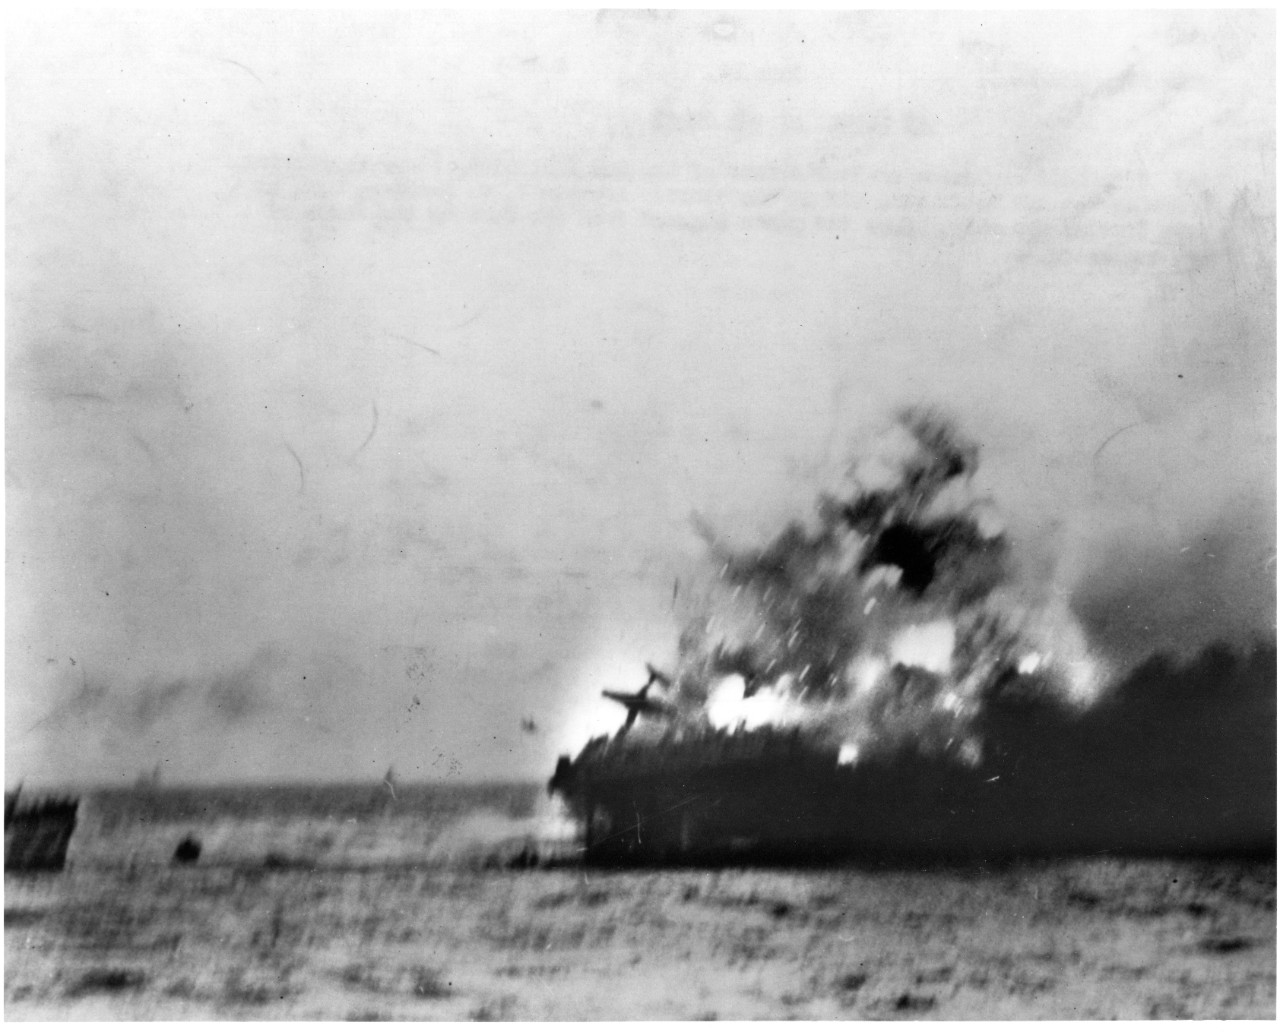 Photo #: 80-G-11916  Battle of the Coral Sea, May 1942